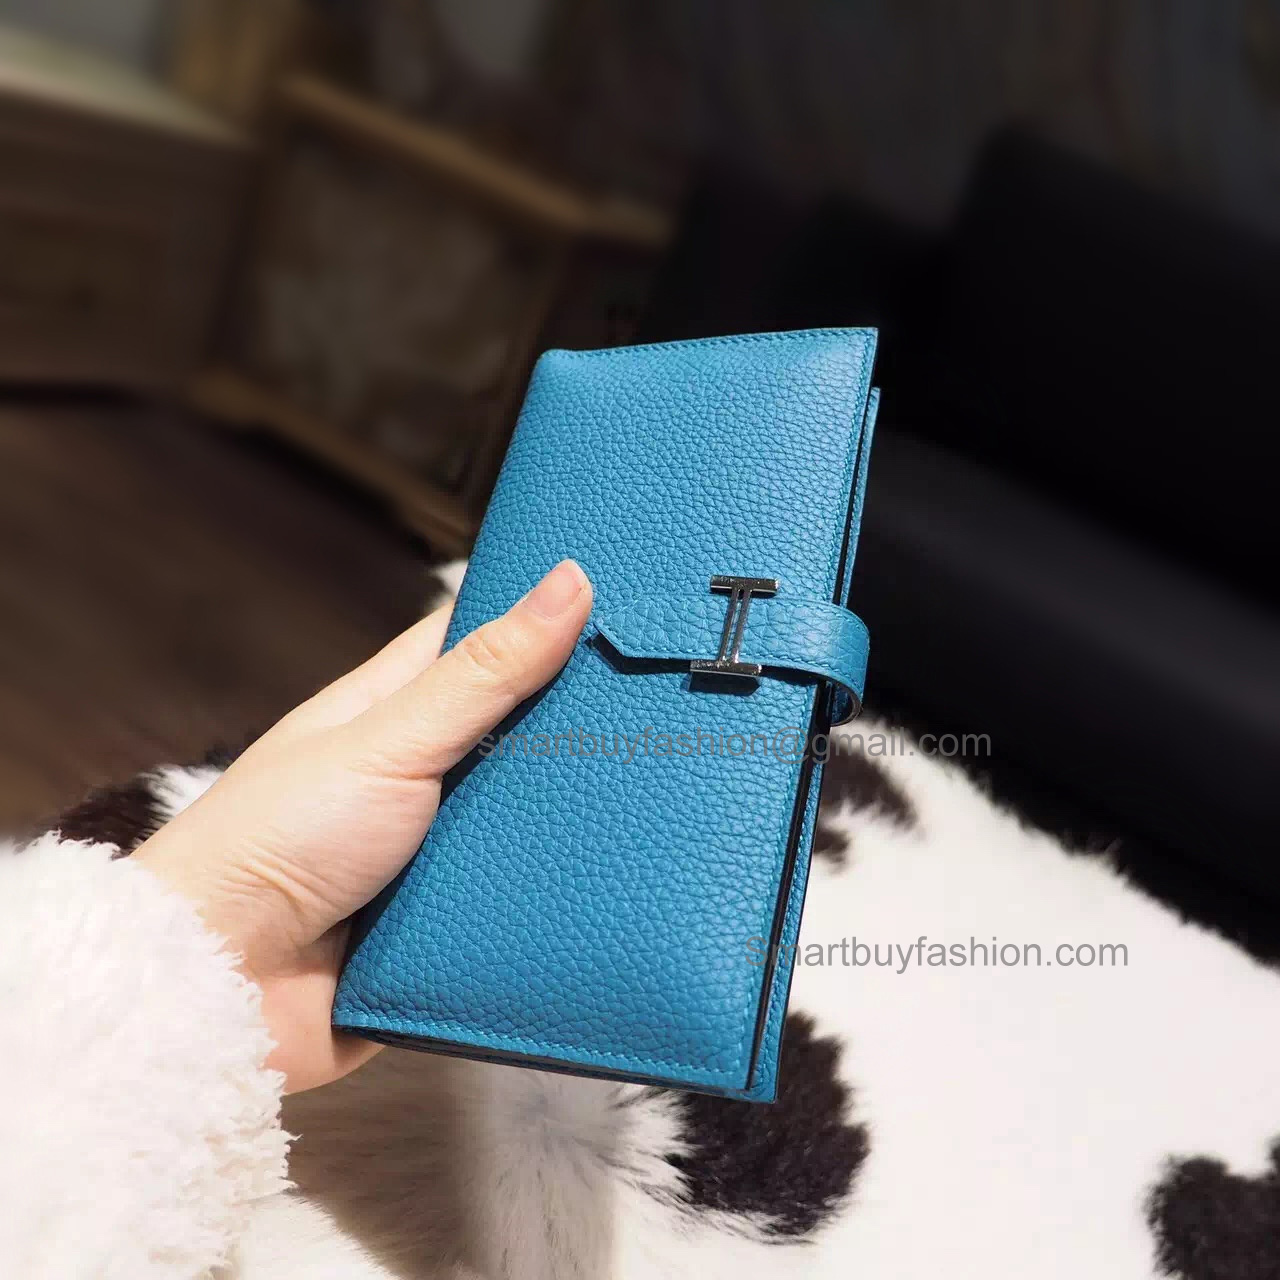 Hermes Bearn Wallet Hand Stitched in 7b Turquoise Blue Togo Calfskin PHW